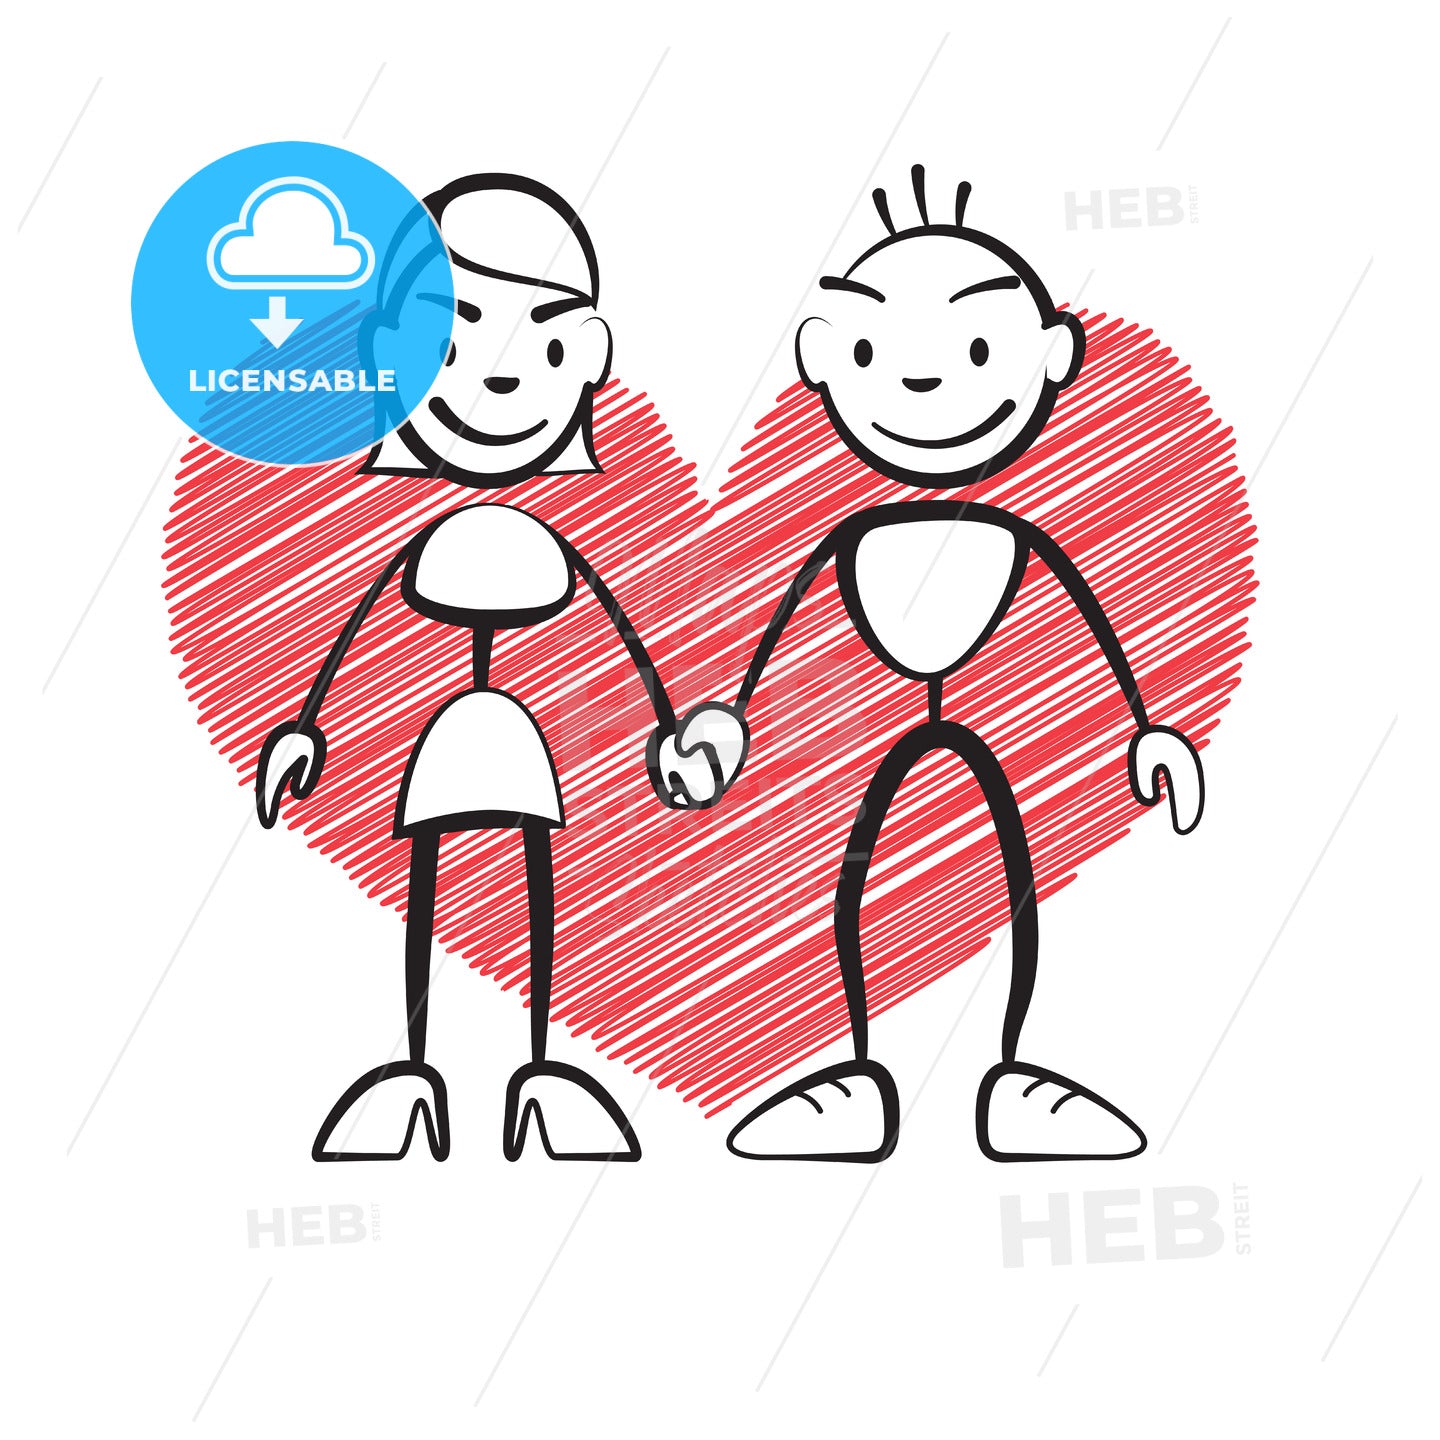 Stickman greeting card with sketched heart – instant download